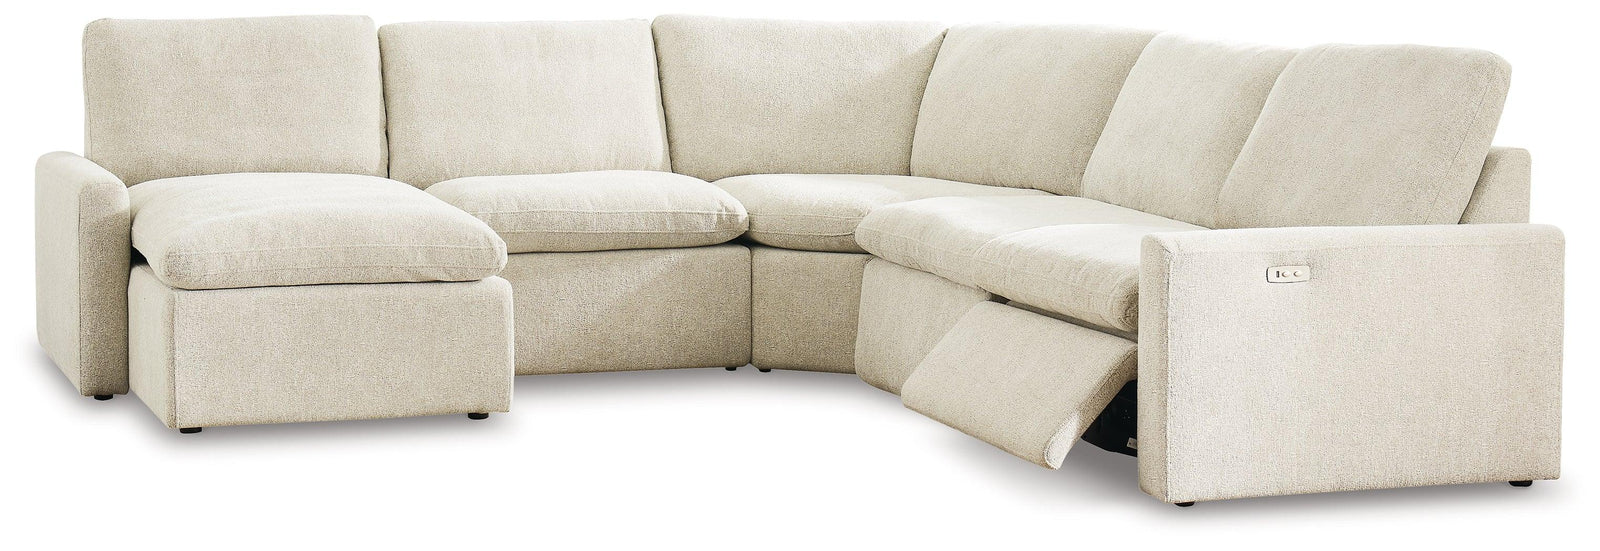 Hartsdale Linen 5-Piece Left Arm Facing Reclining Sectional With Chaise - Ella Furniture